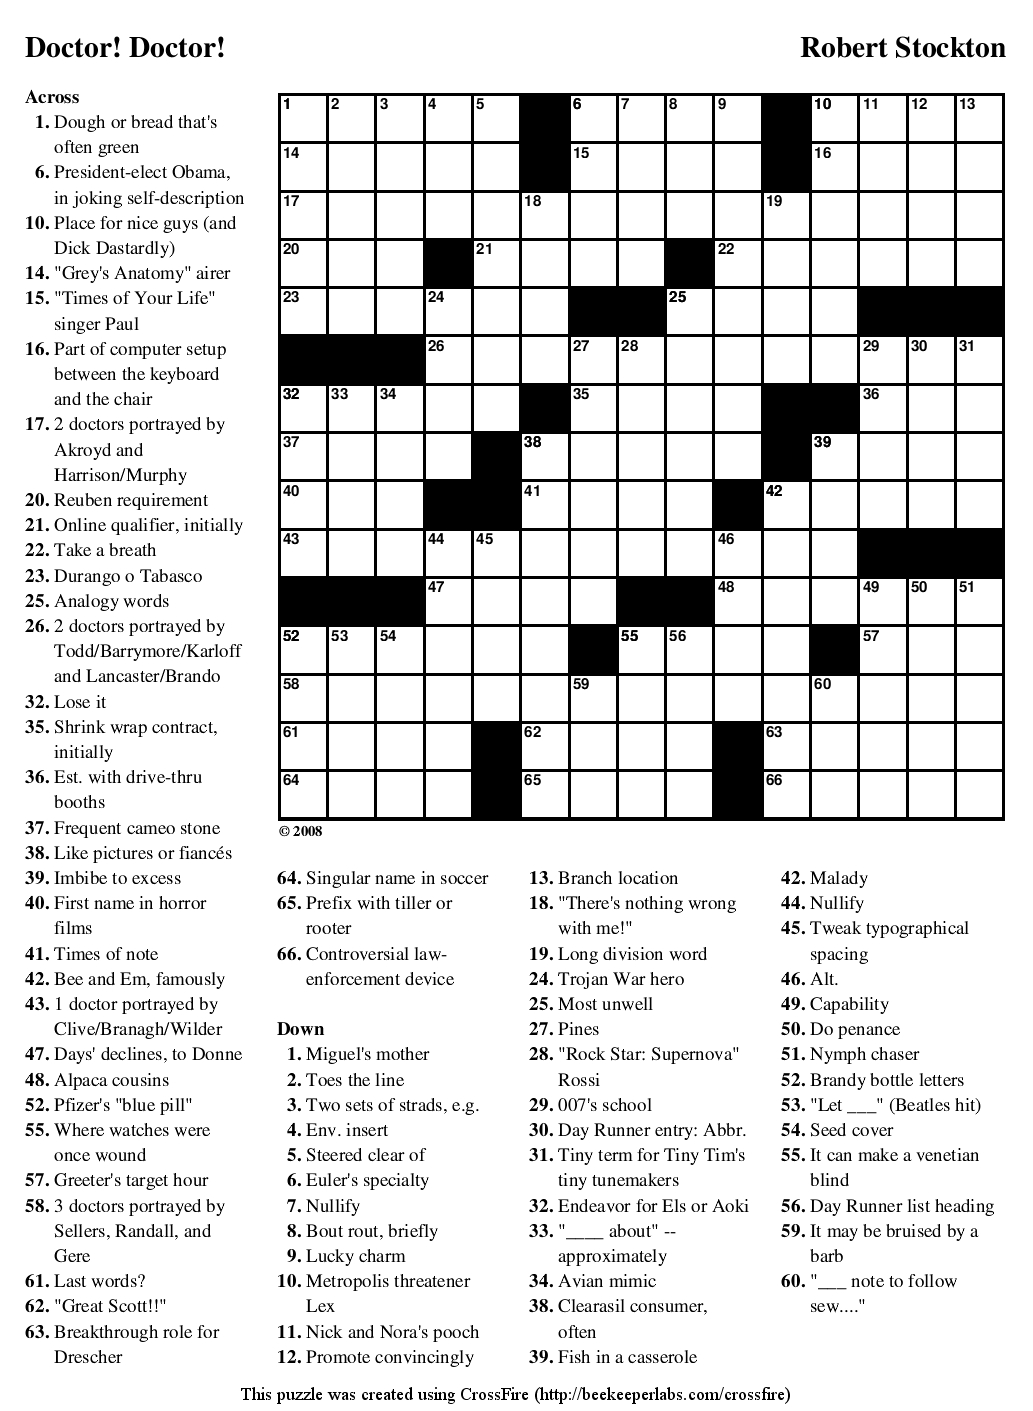 Crossword Puzzles Printable - Yahoo Image Search Results | Crossword - Printable Crossword Puzzles No Download